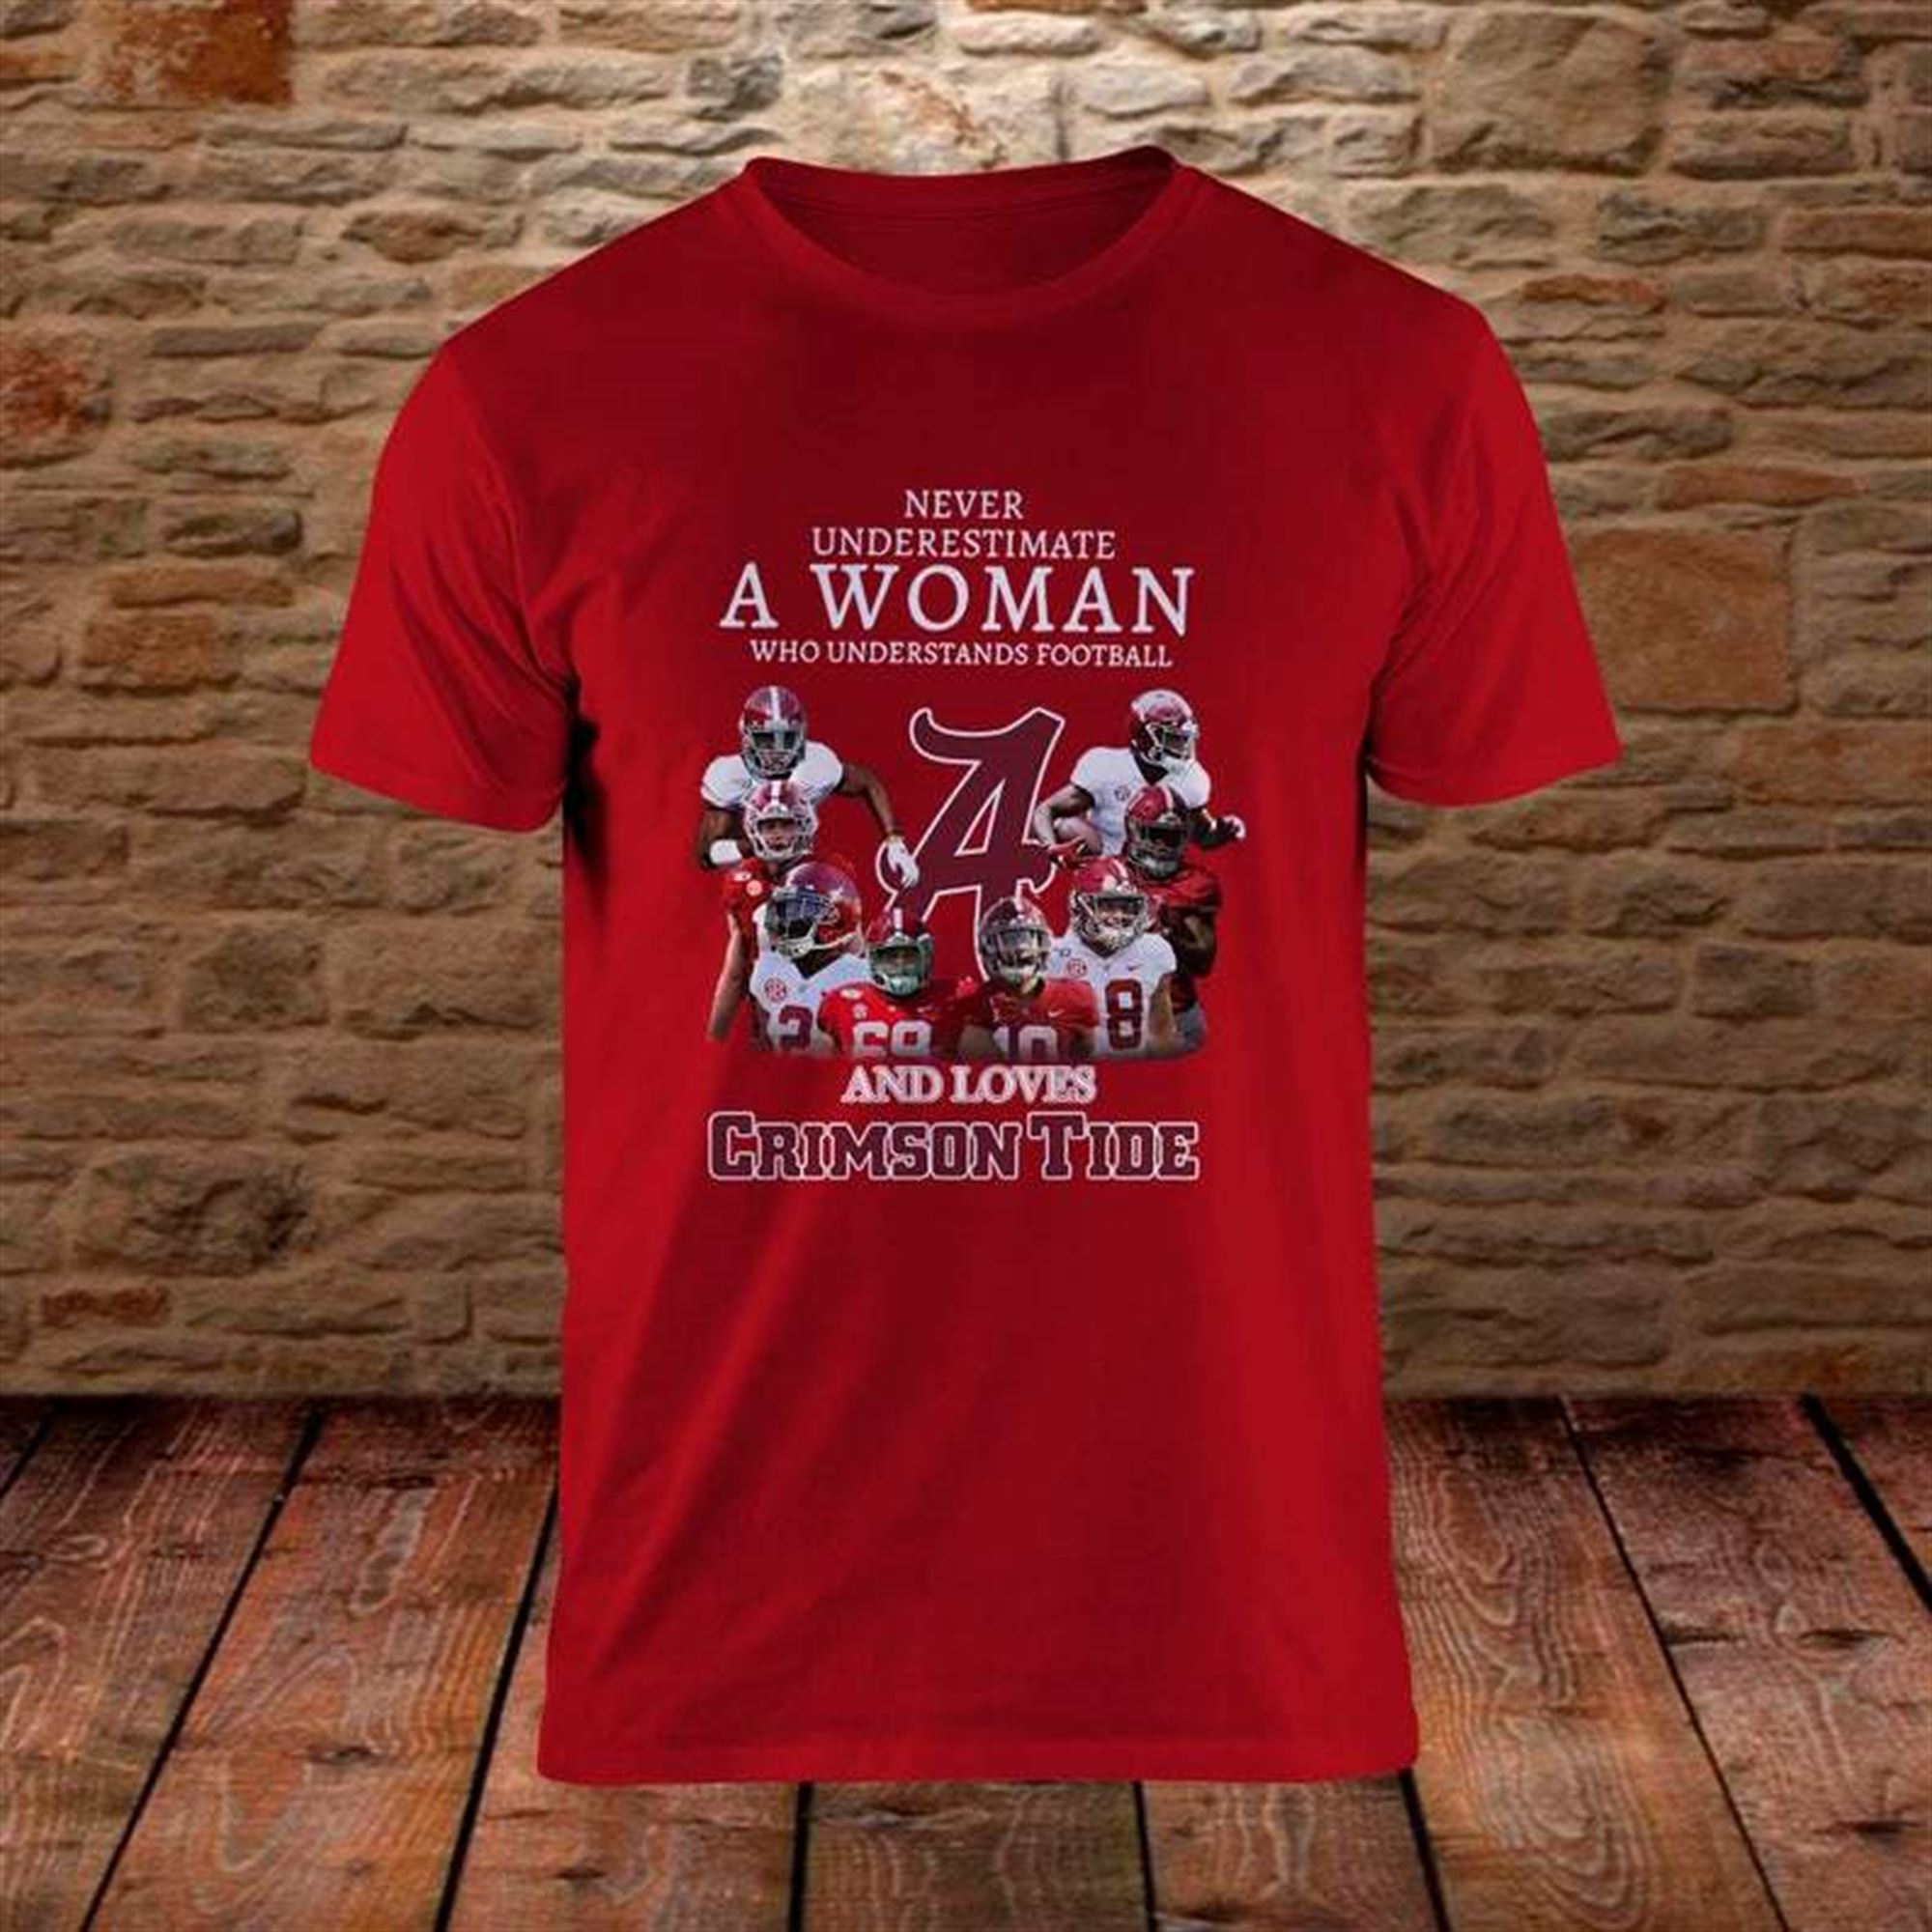 Never Underestimate A Woman Who Understands Football And Loves Alabama Crimson Tide T-shirt Plus Size Up To 5x